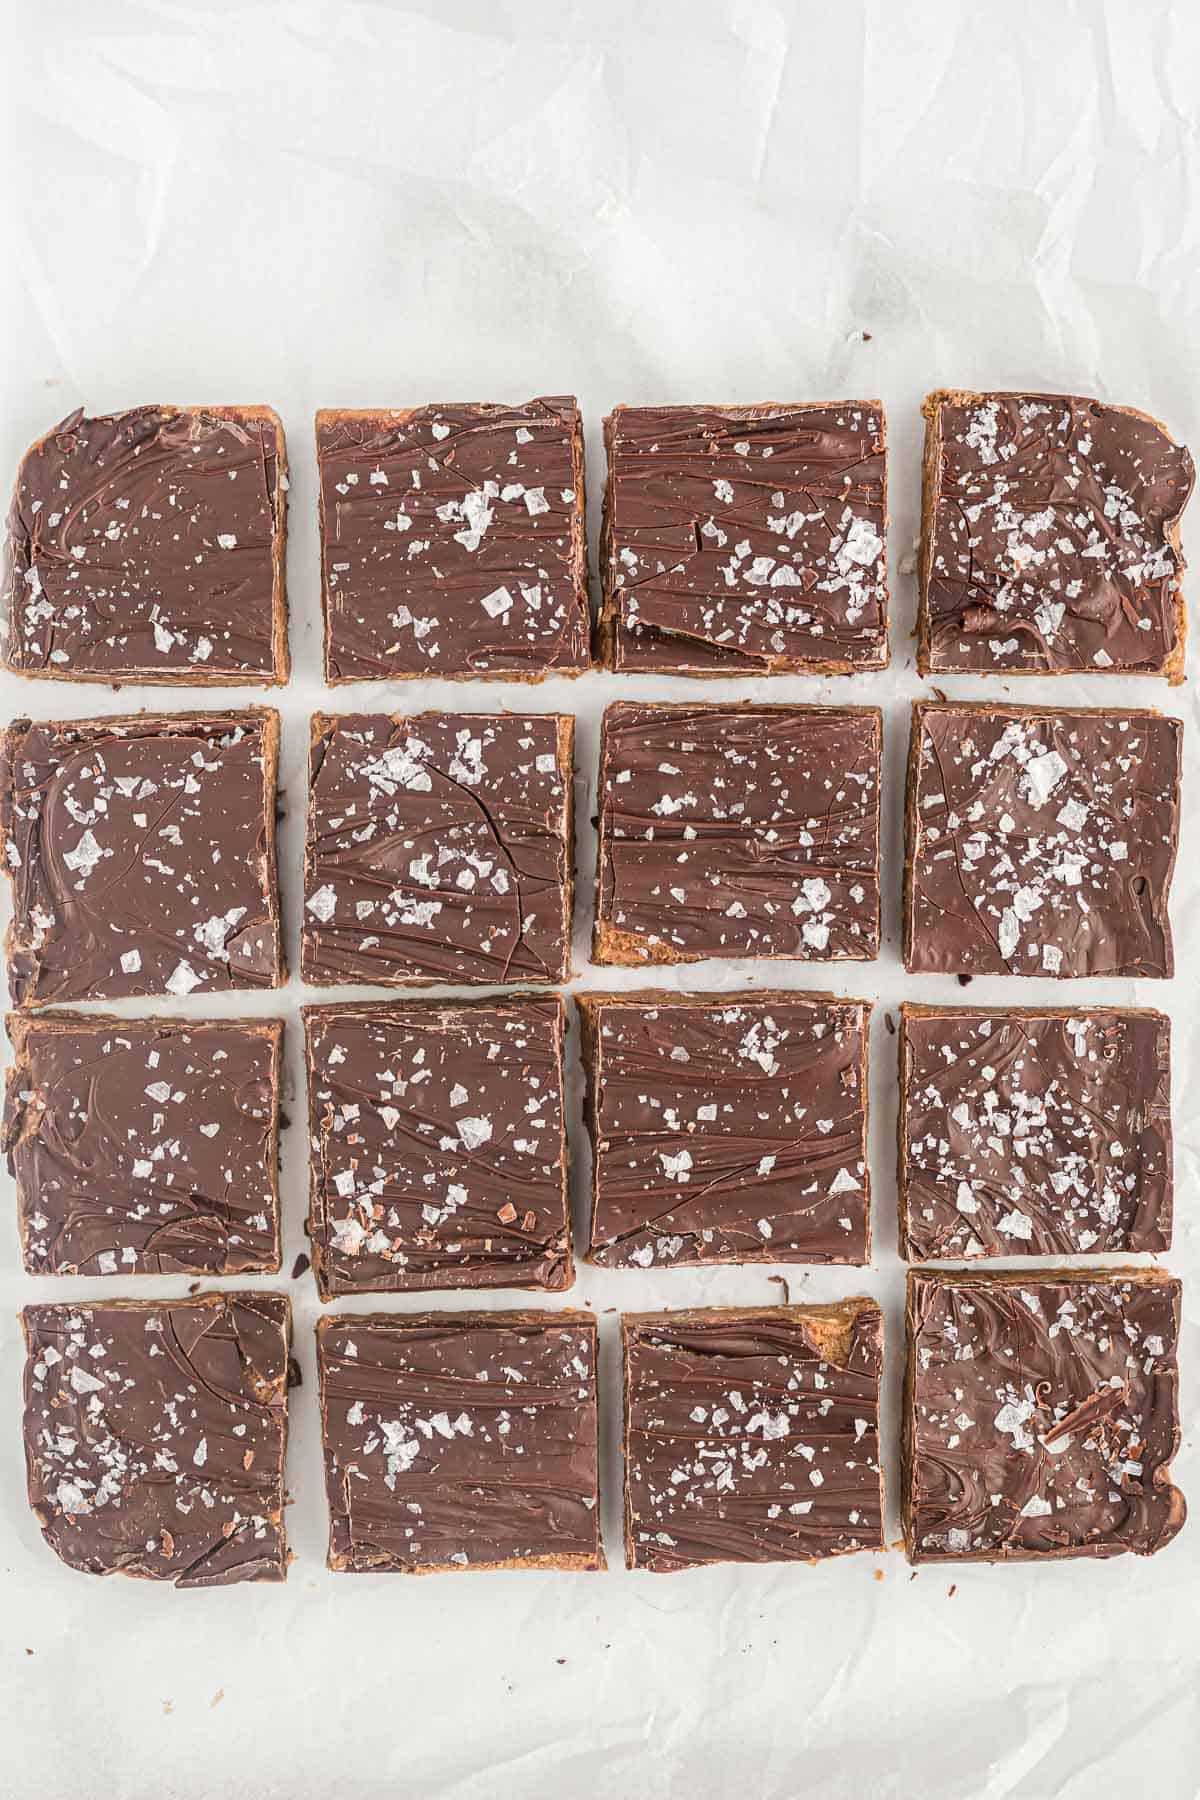 chocolate protein bars cut into 16 pieces